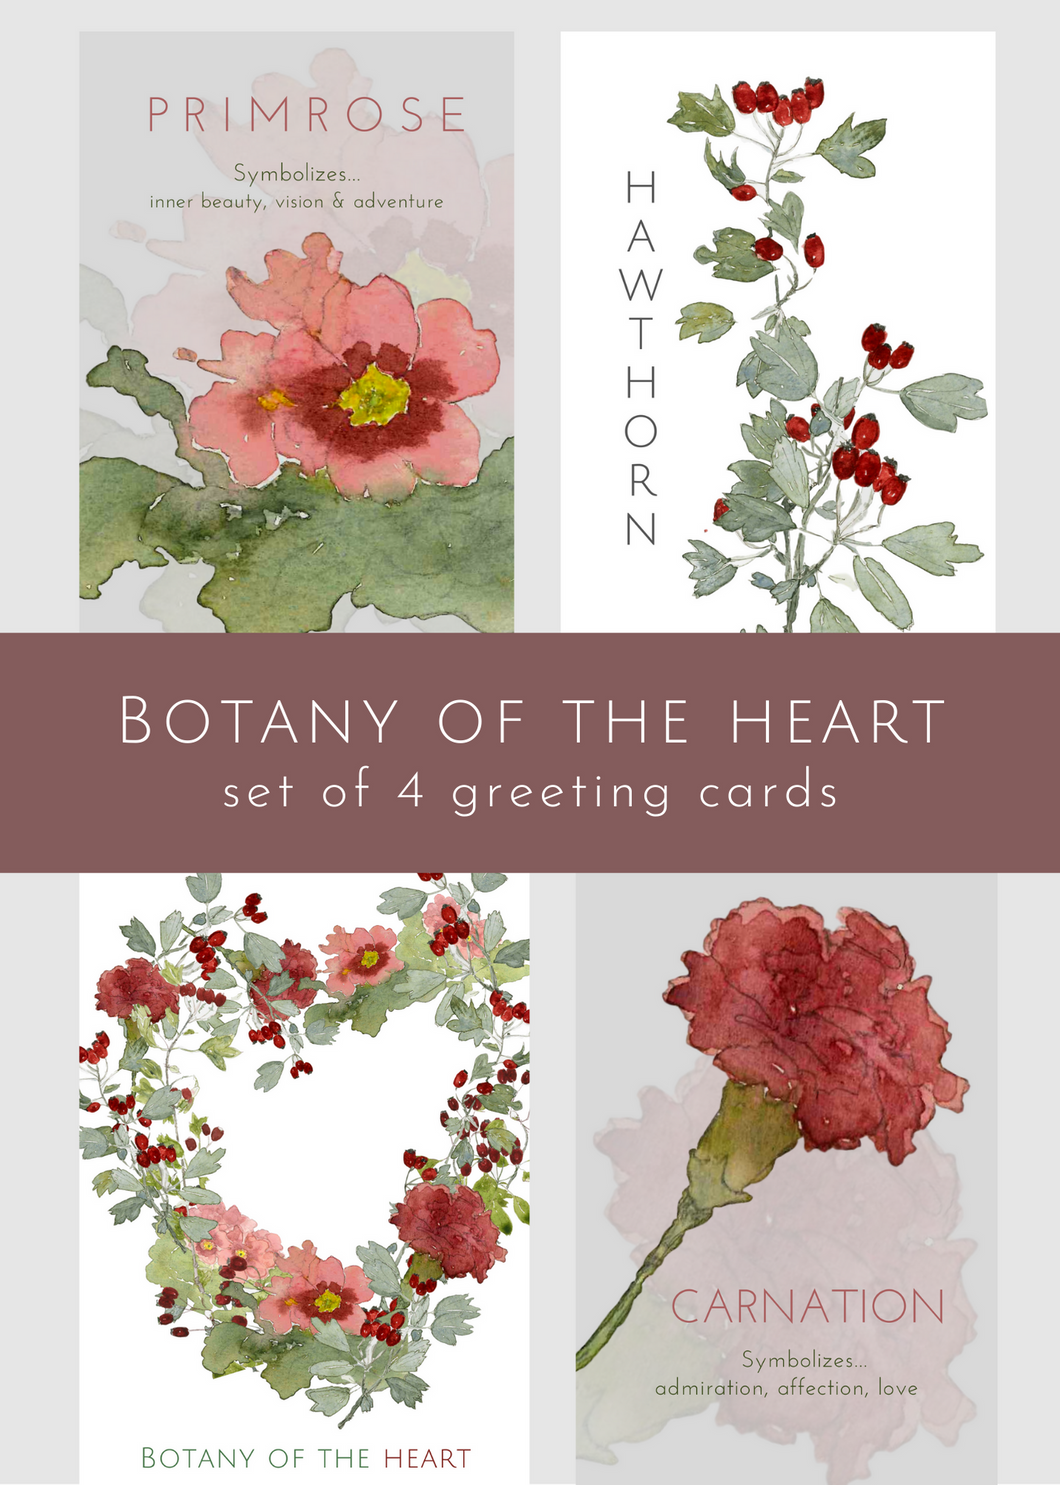 Botany of the Heart, set of 4